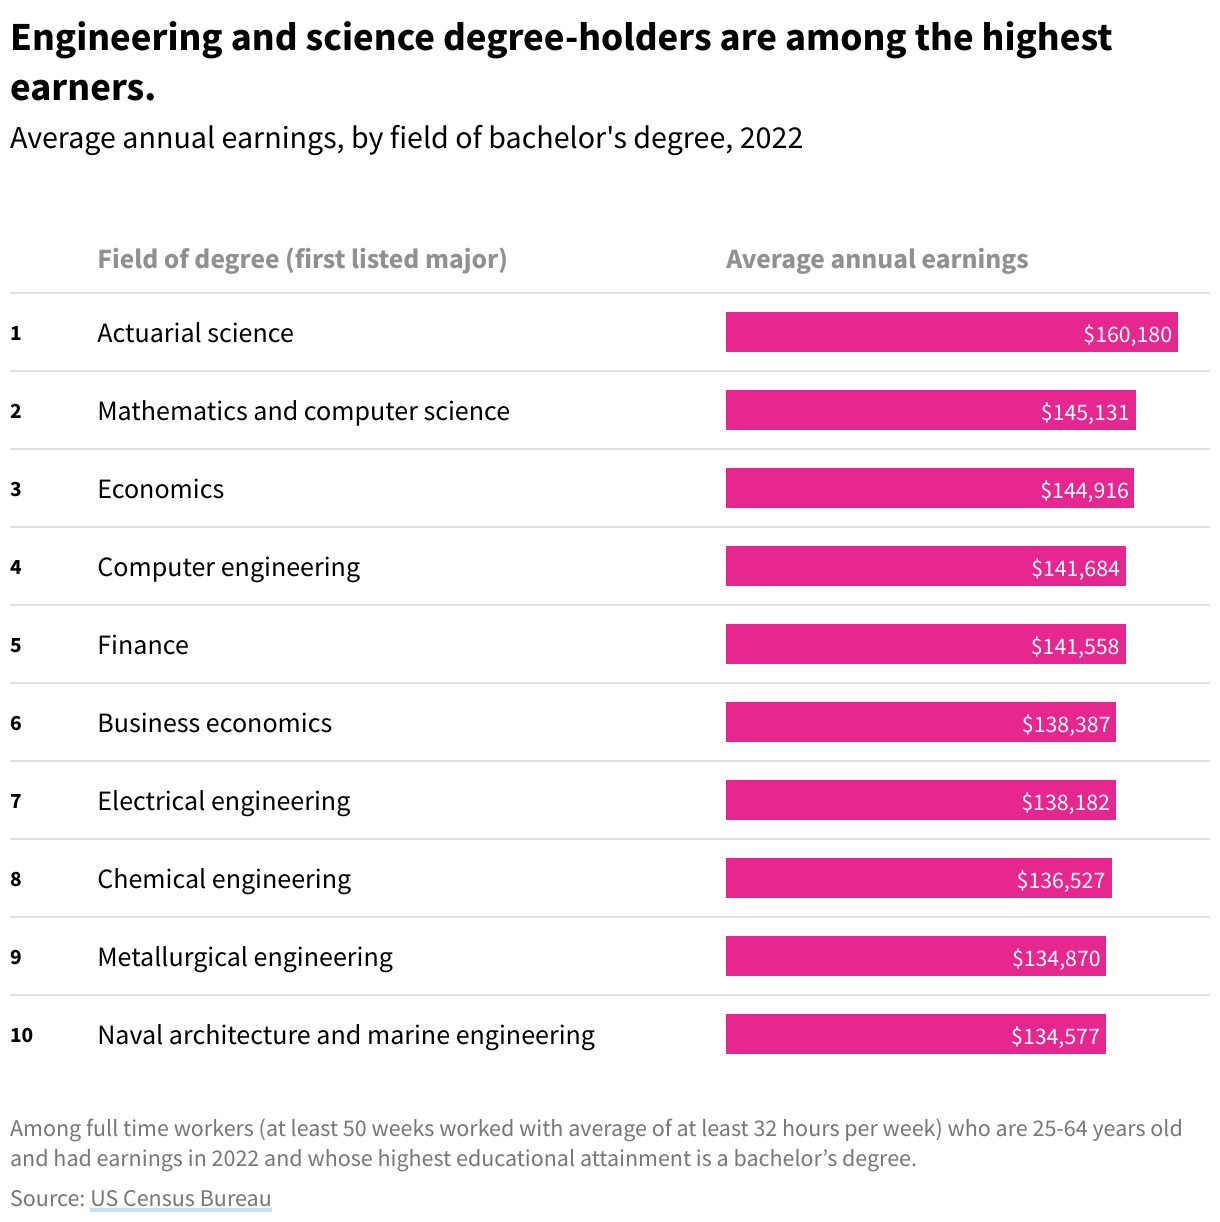 Bar graph showing the mean annual earnings for field of bachelor's degree in 2022. Engineering and science degree-holders are among the highest earners.